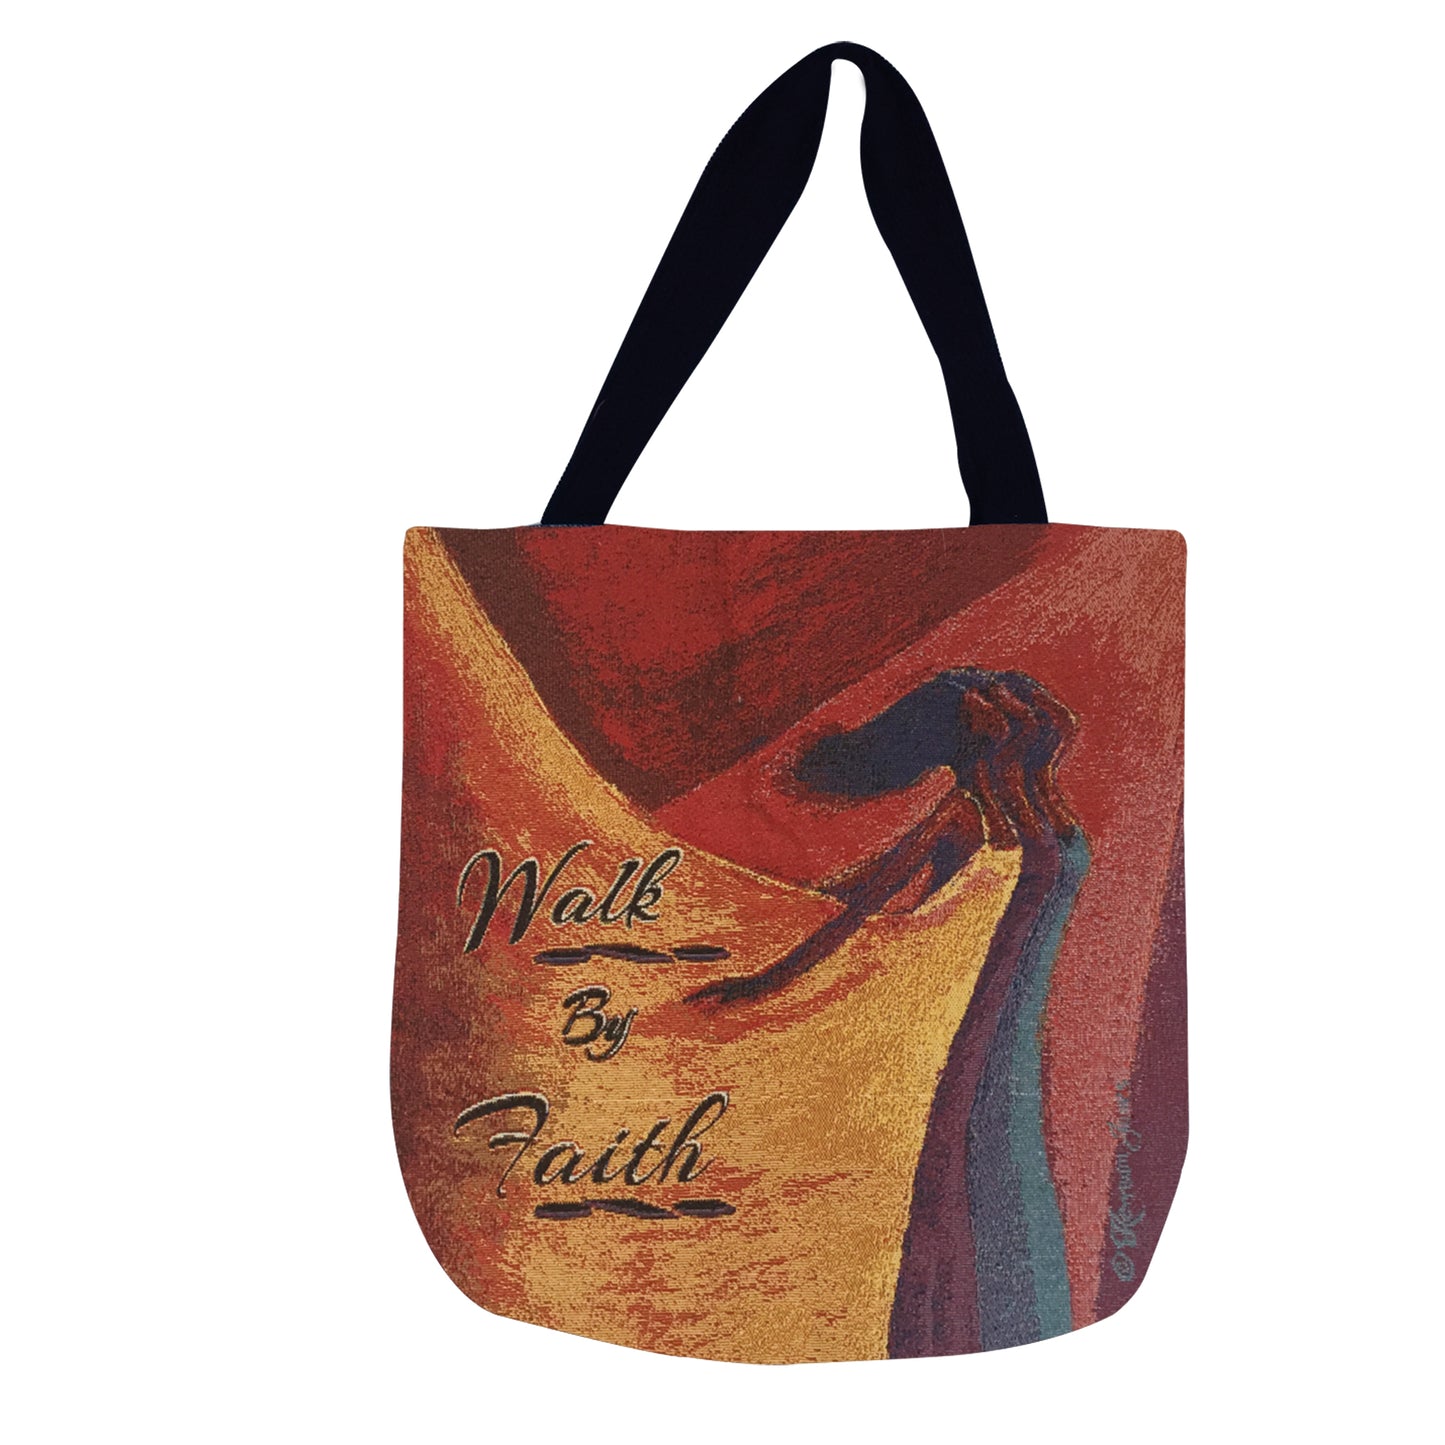 Walking By Faith Woven Tote Bag